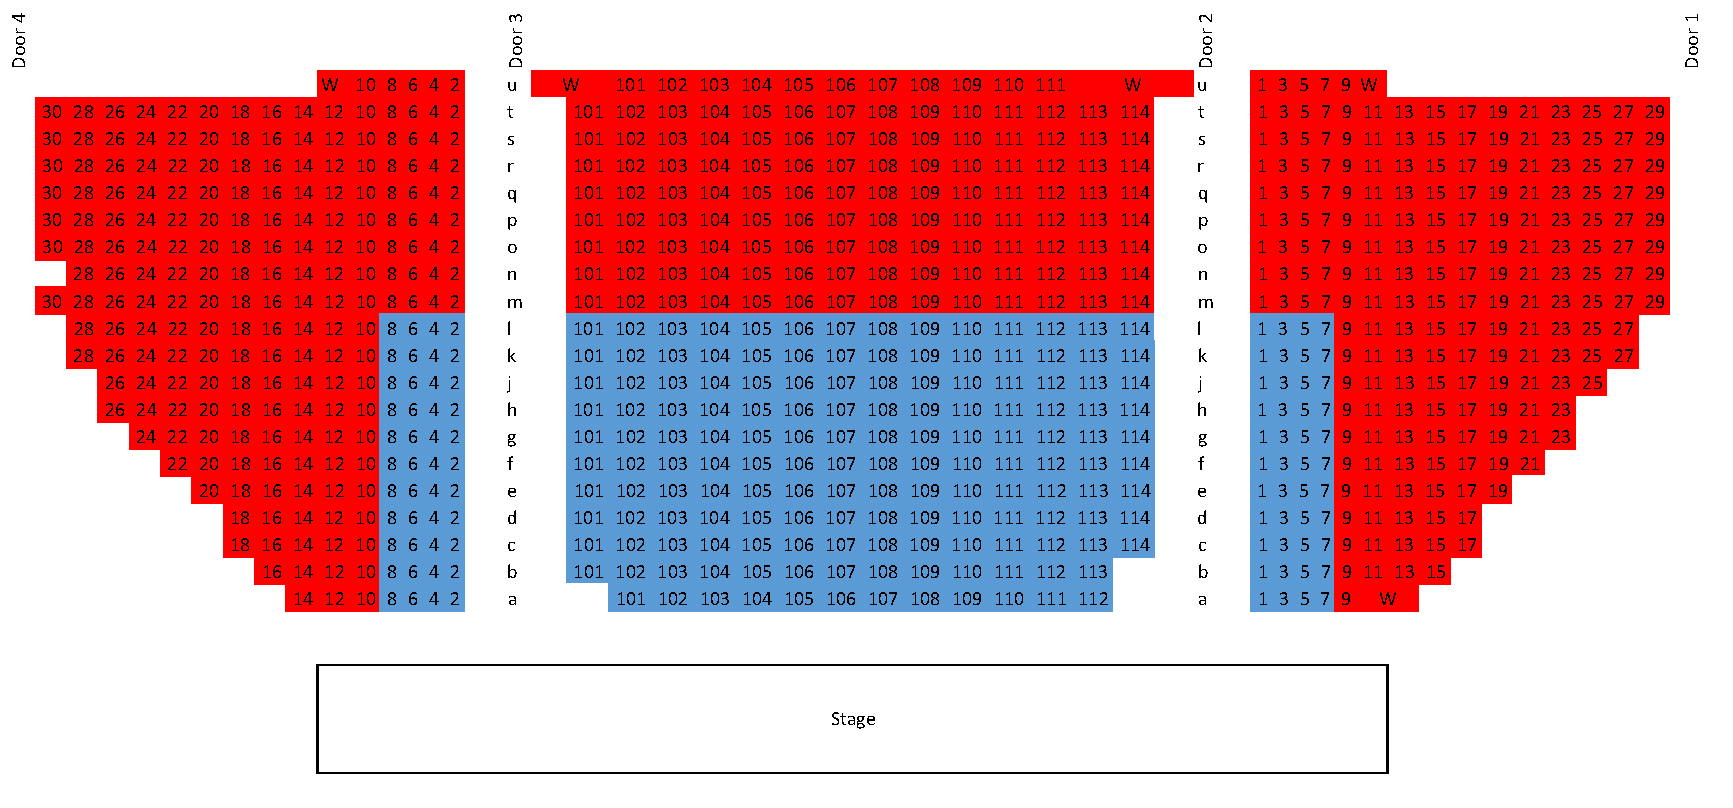 Ppac Seating Chart Updated 2 19 16